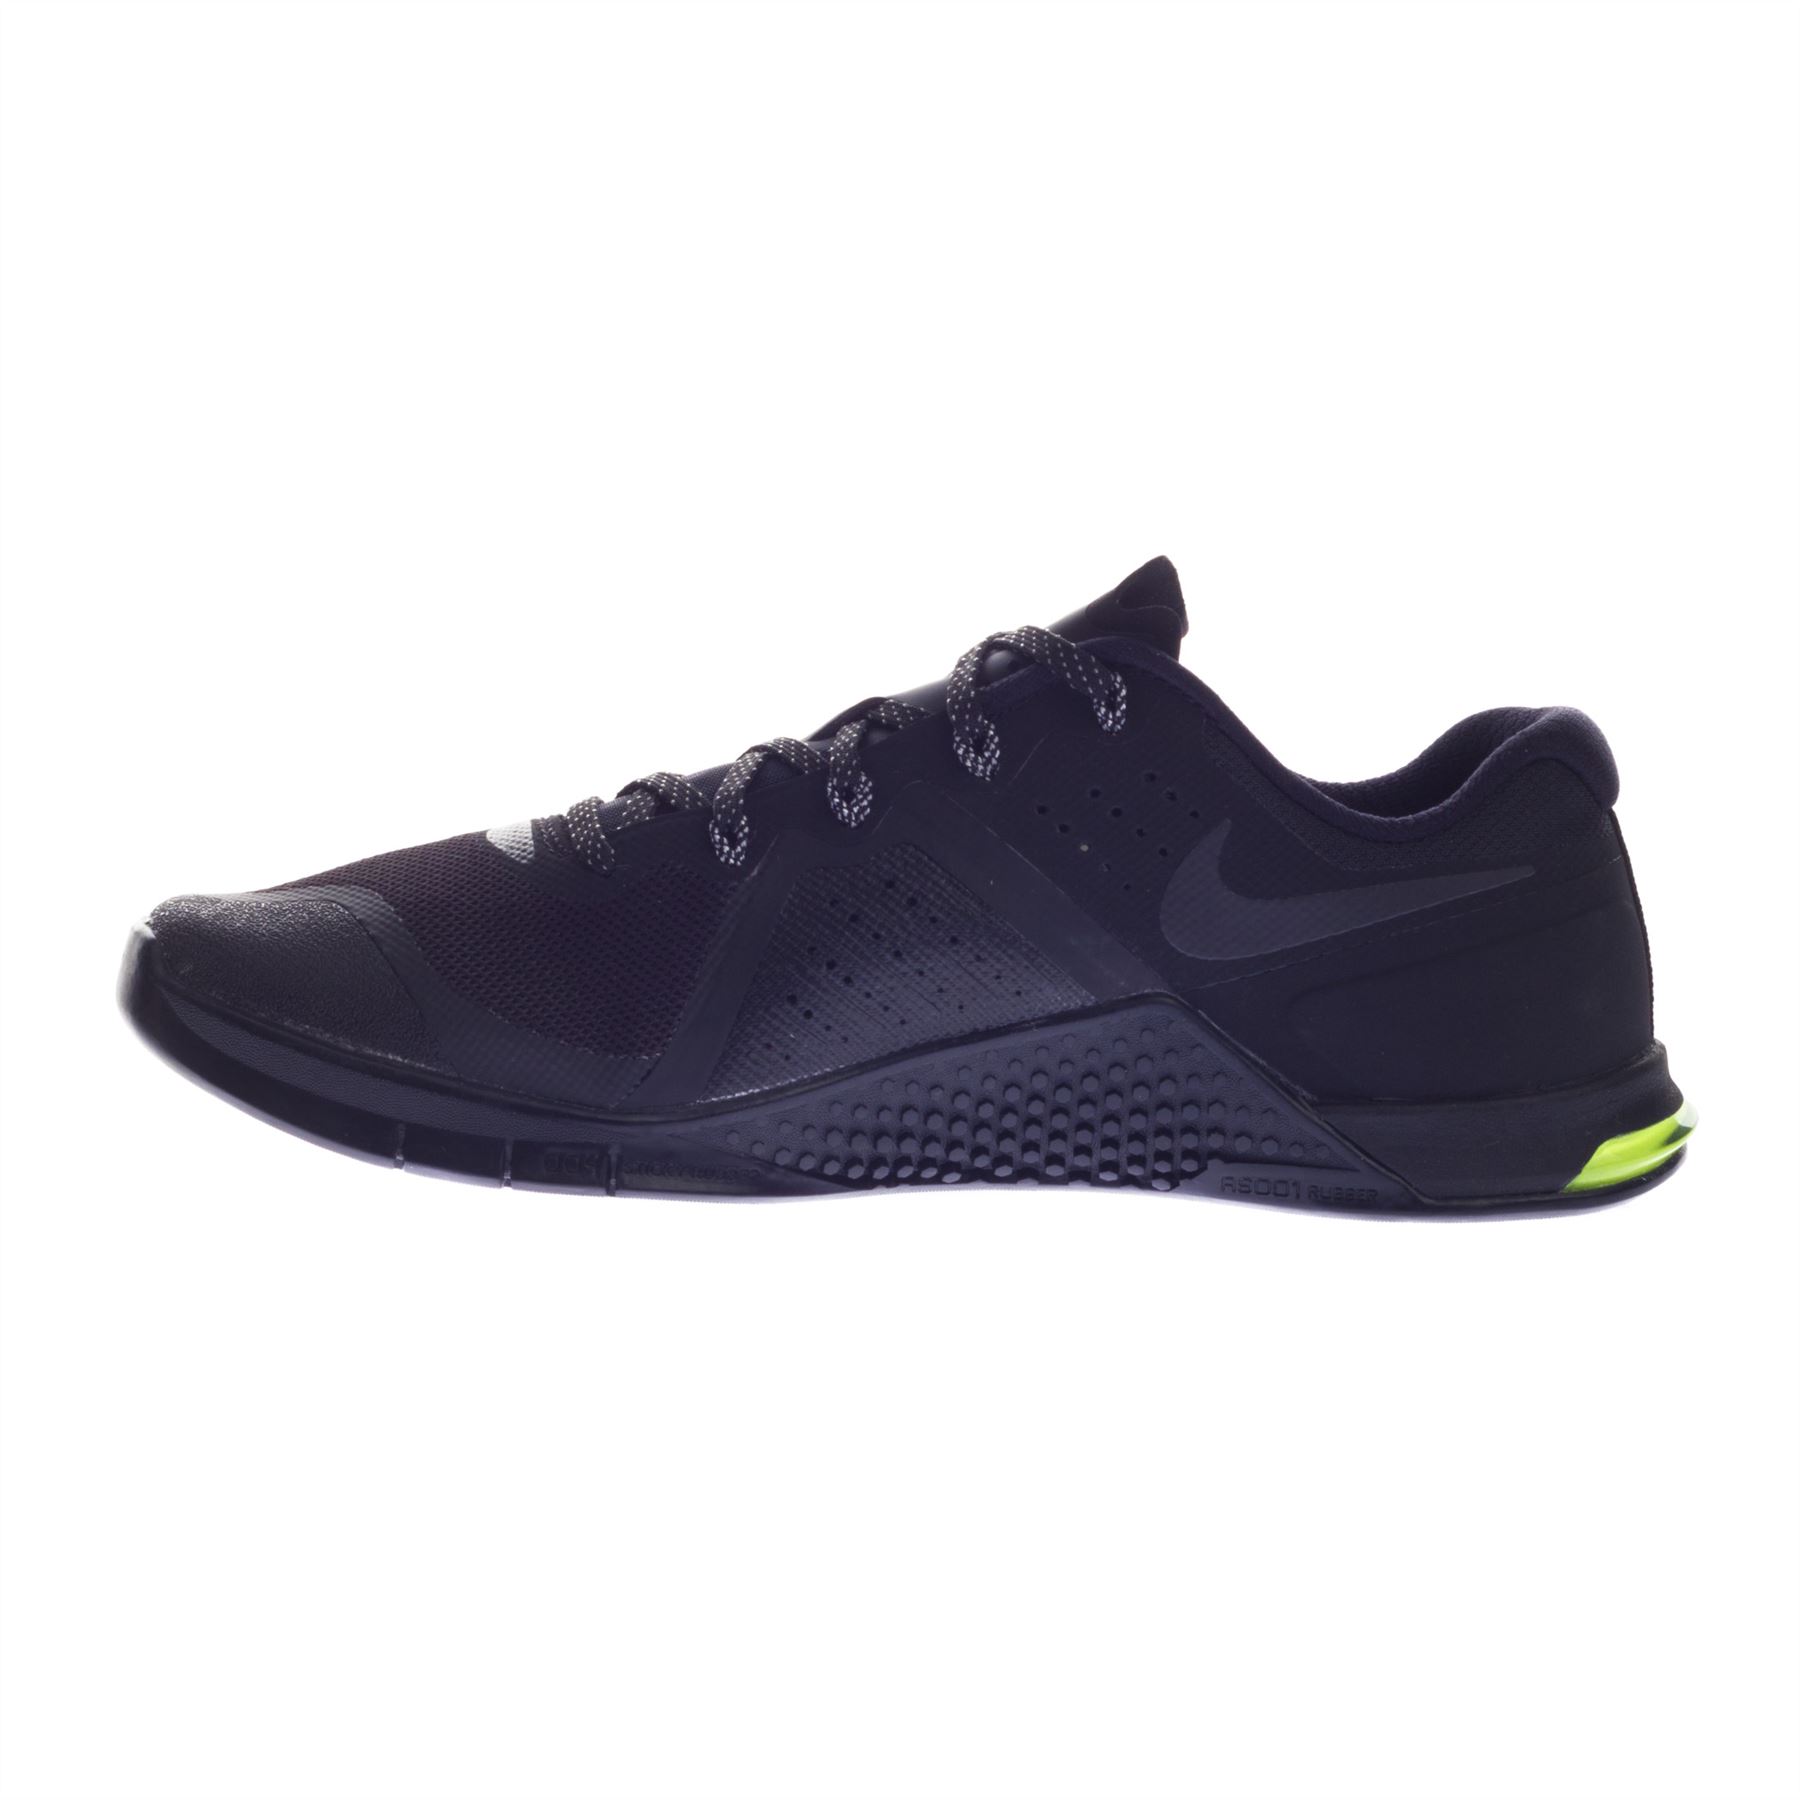 Nike Men's Flywire Metcon 2 Low Top Running Lace Up Trainers | eBay